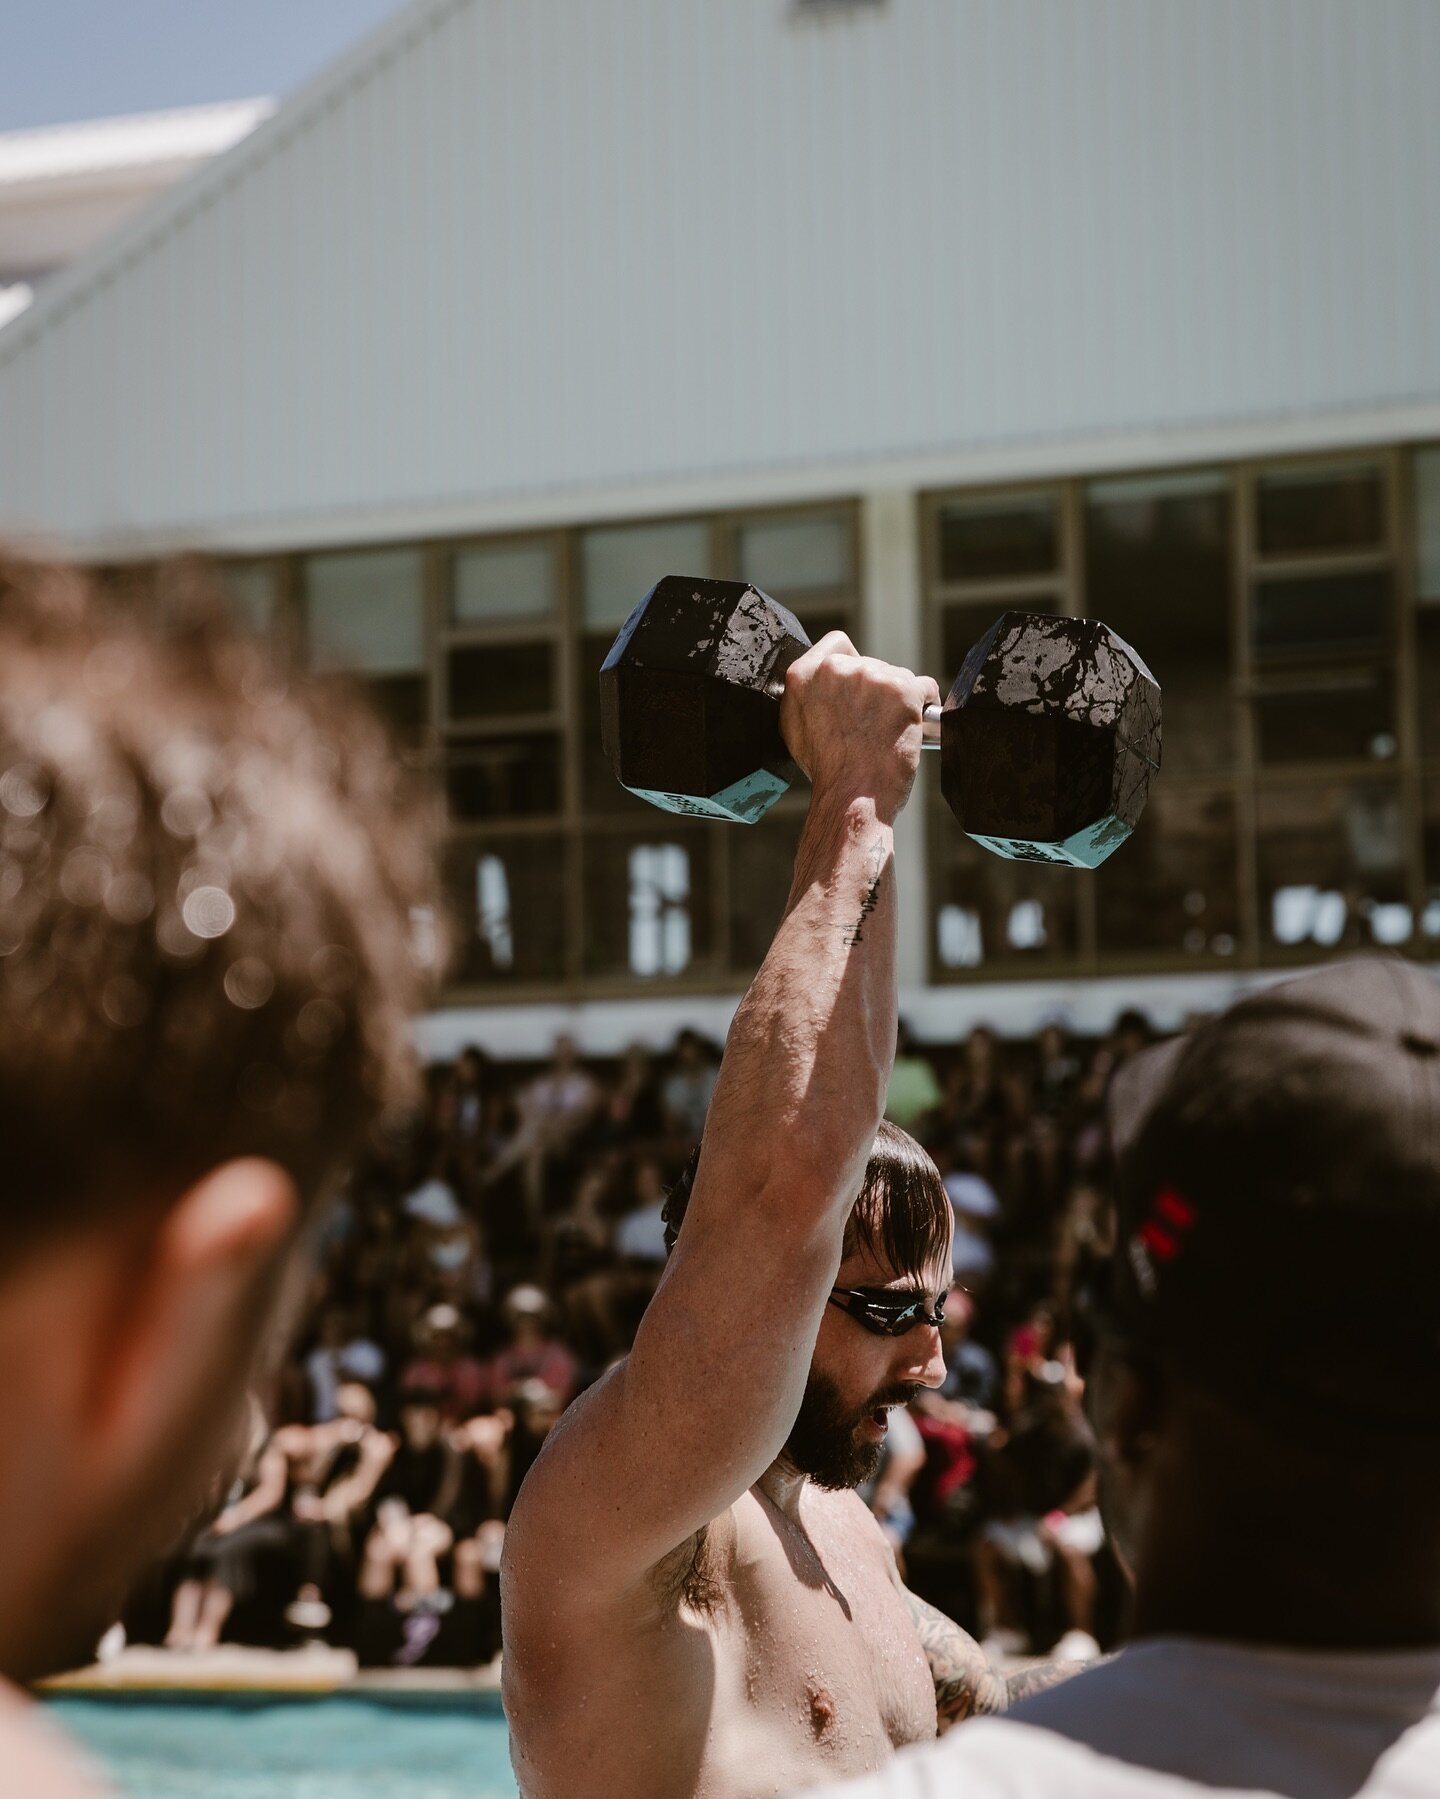 Hands up if you got your morning Fitness in 🙋

📸: @eringoodman_ 

#Fitchella23 #Fitness #JoinTheParty #FitnessFestival #PartyZone #CapeTown #Summer